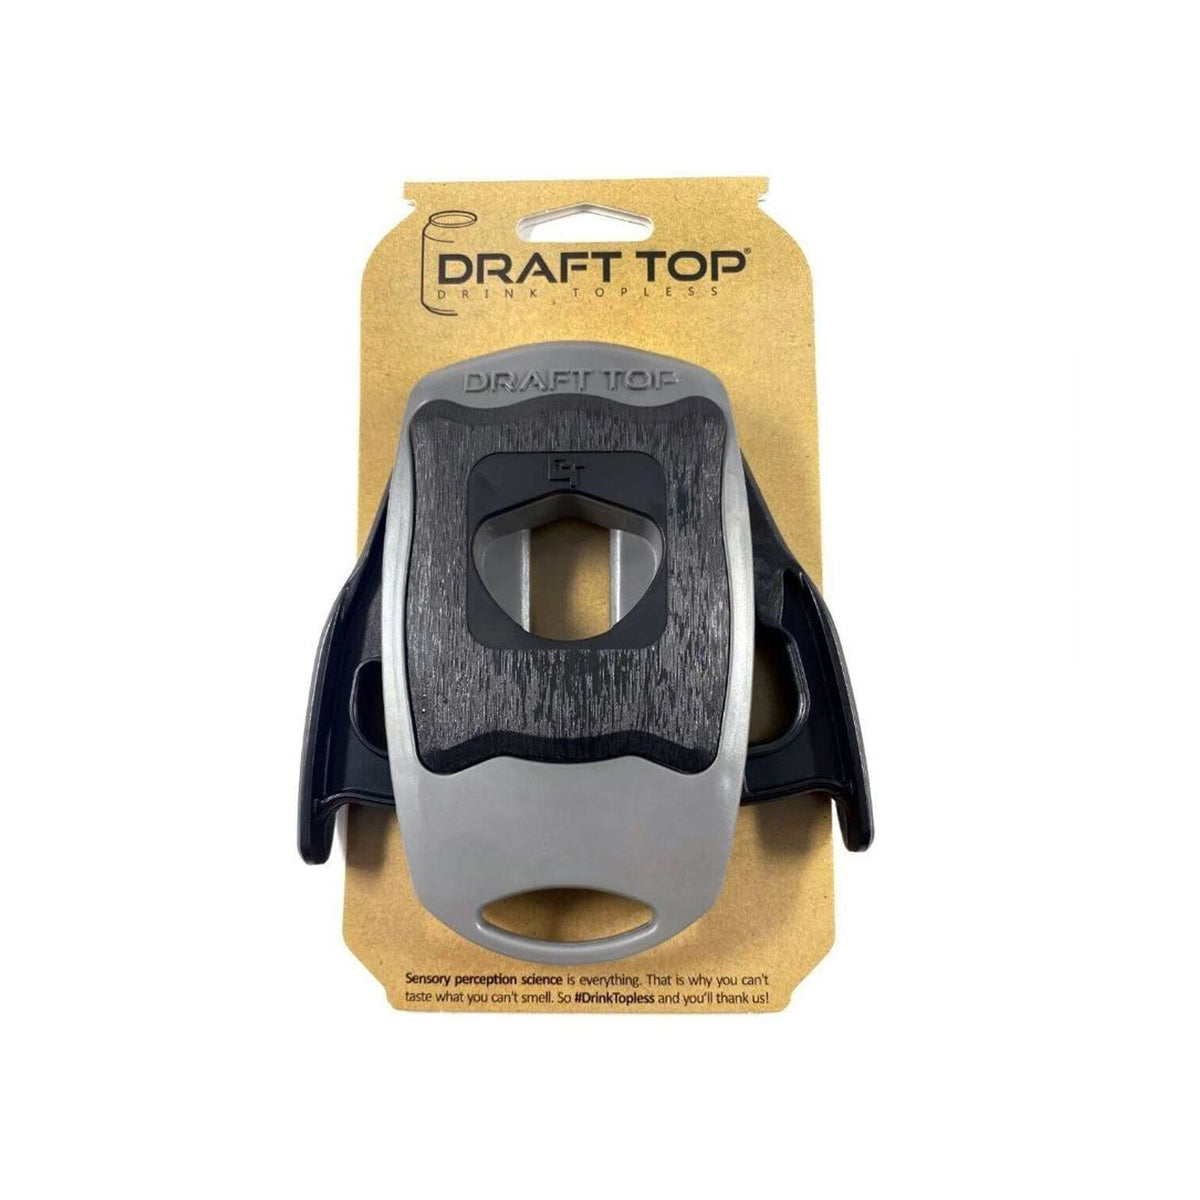 The Draft Top - Drink Topless - Beverage Can Top Remover Made In